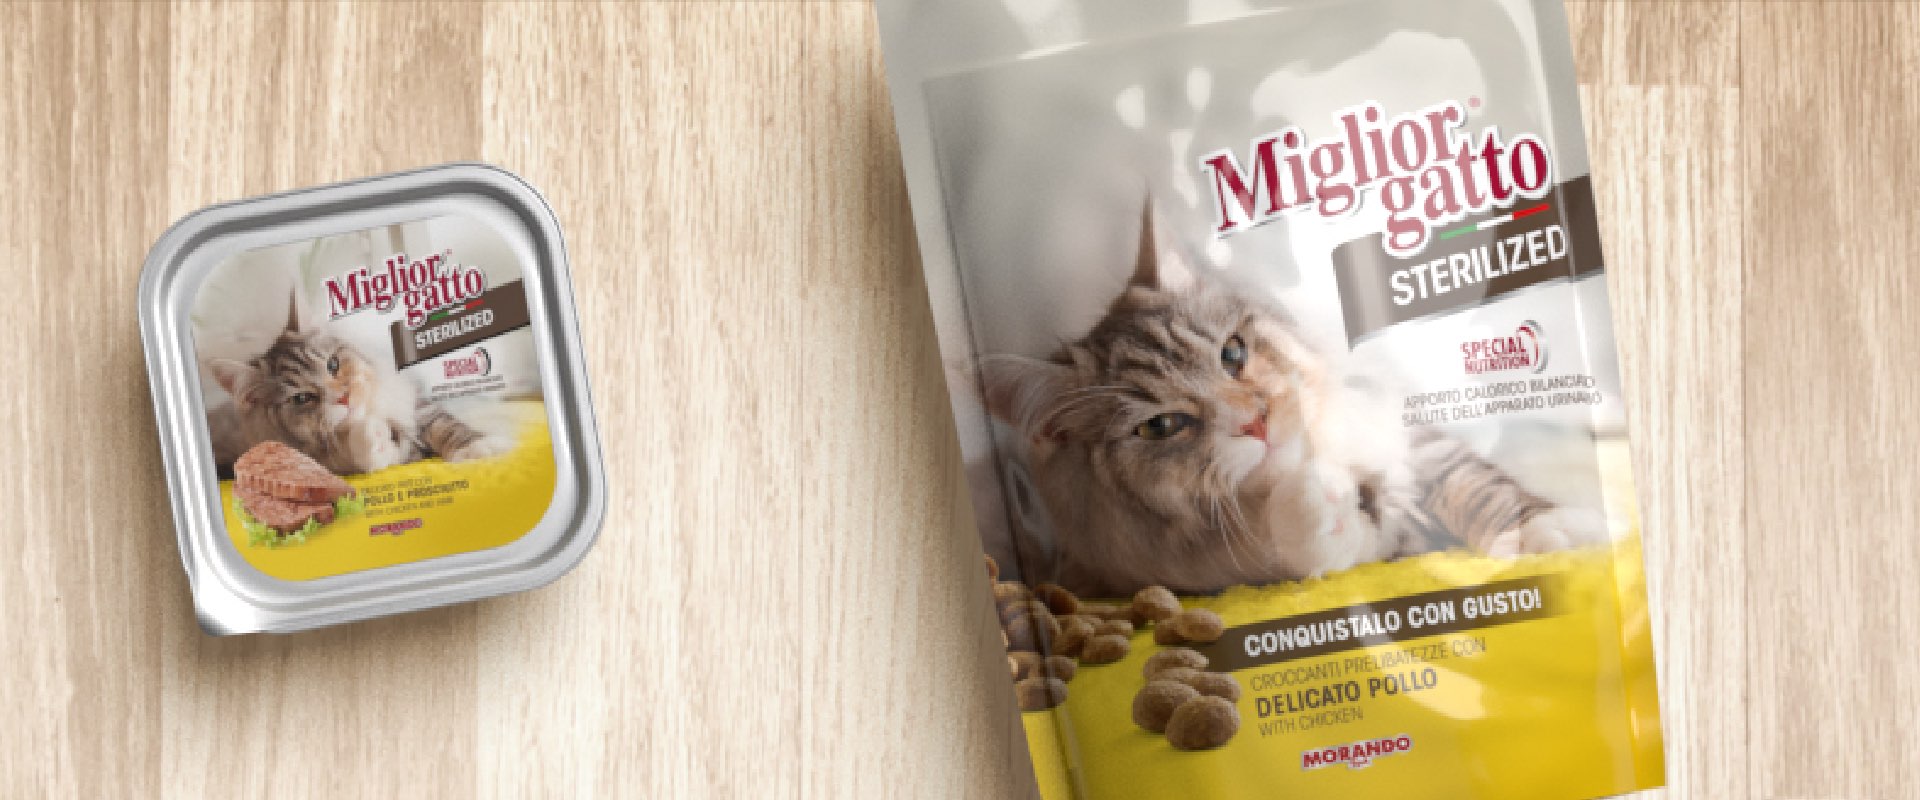 Packaging by ATC for new MigliorGatto Sterilized